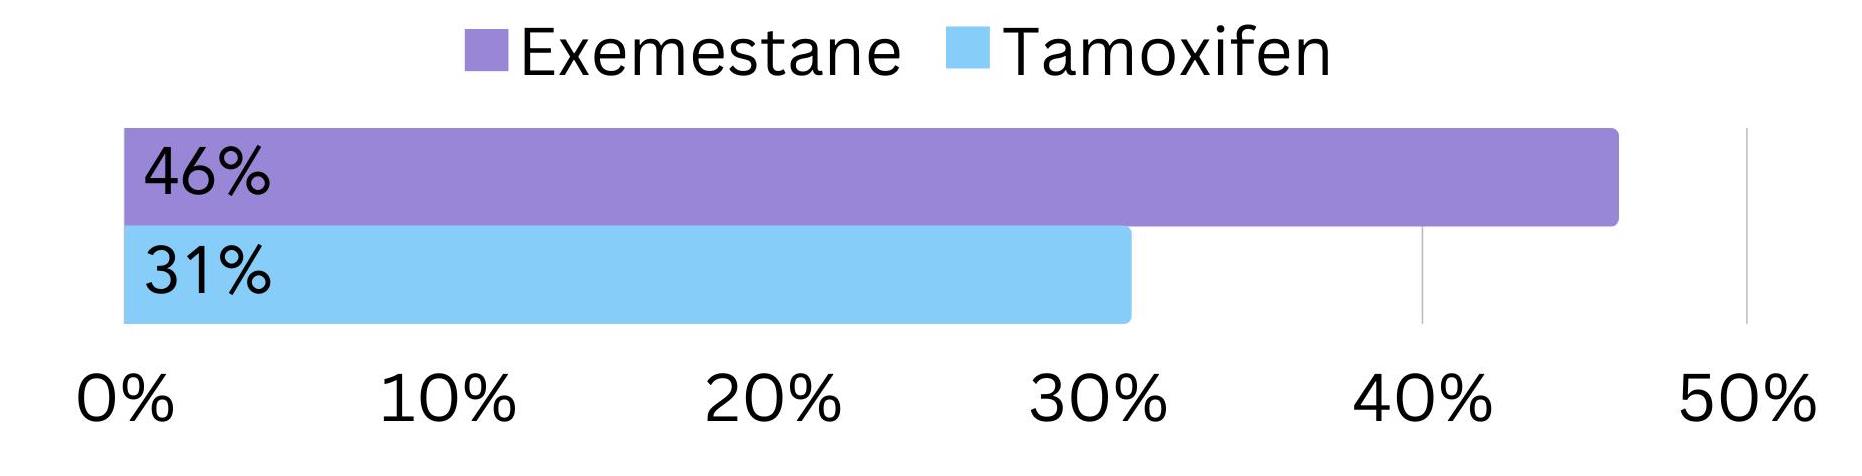 A trial comparing exemestane with tamoxifen in post-menopausal women with breast cancer